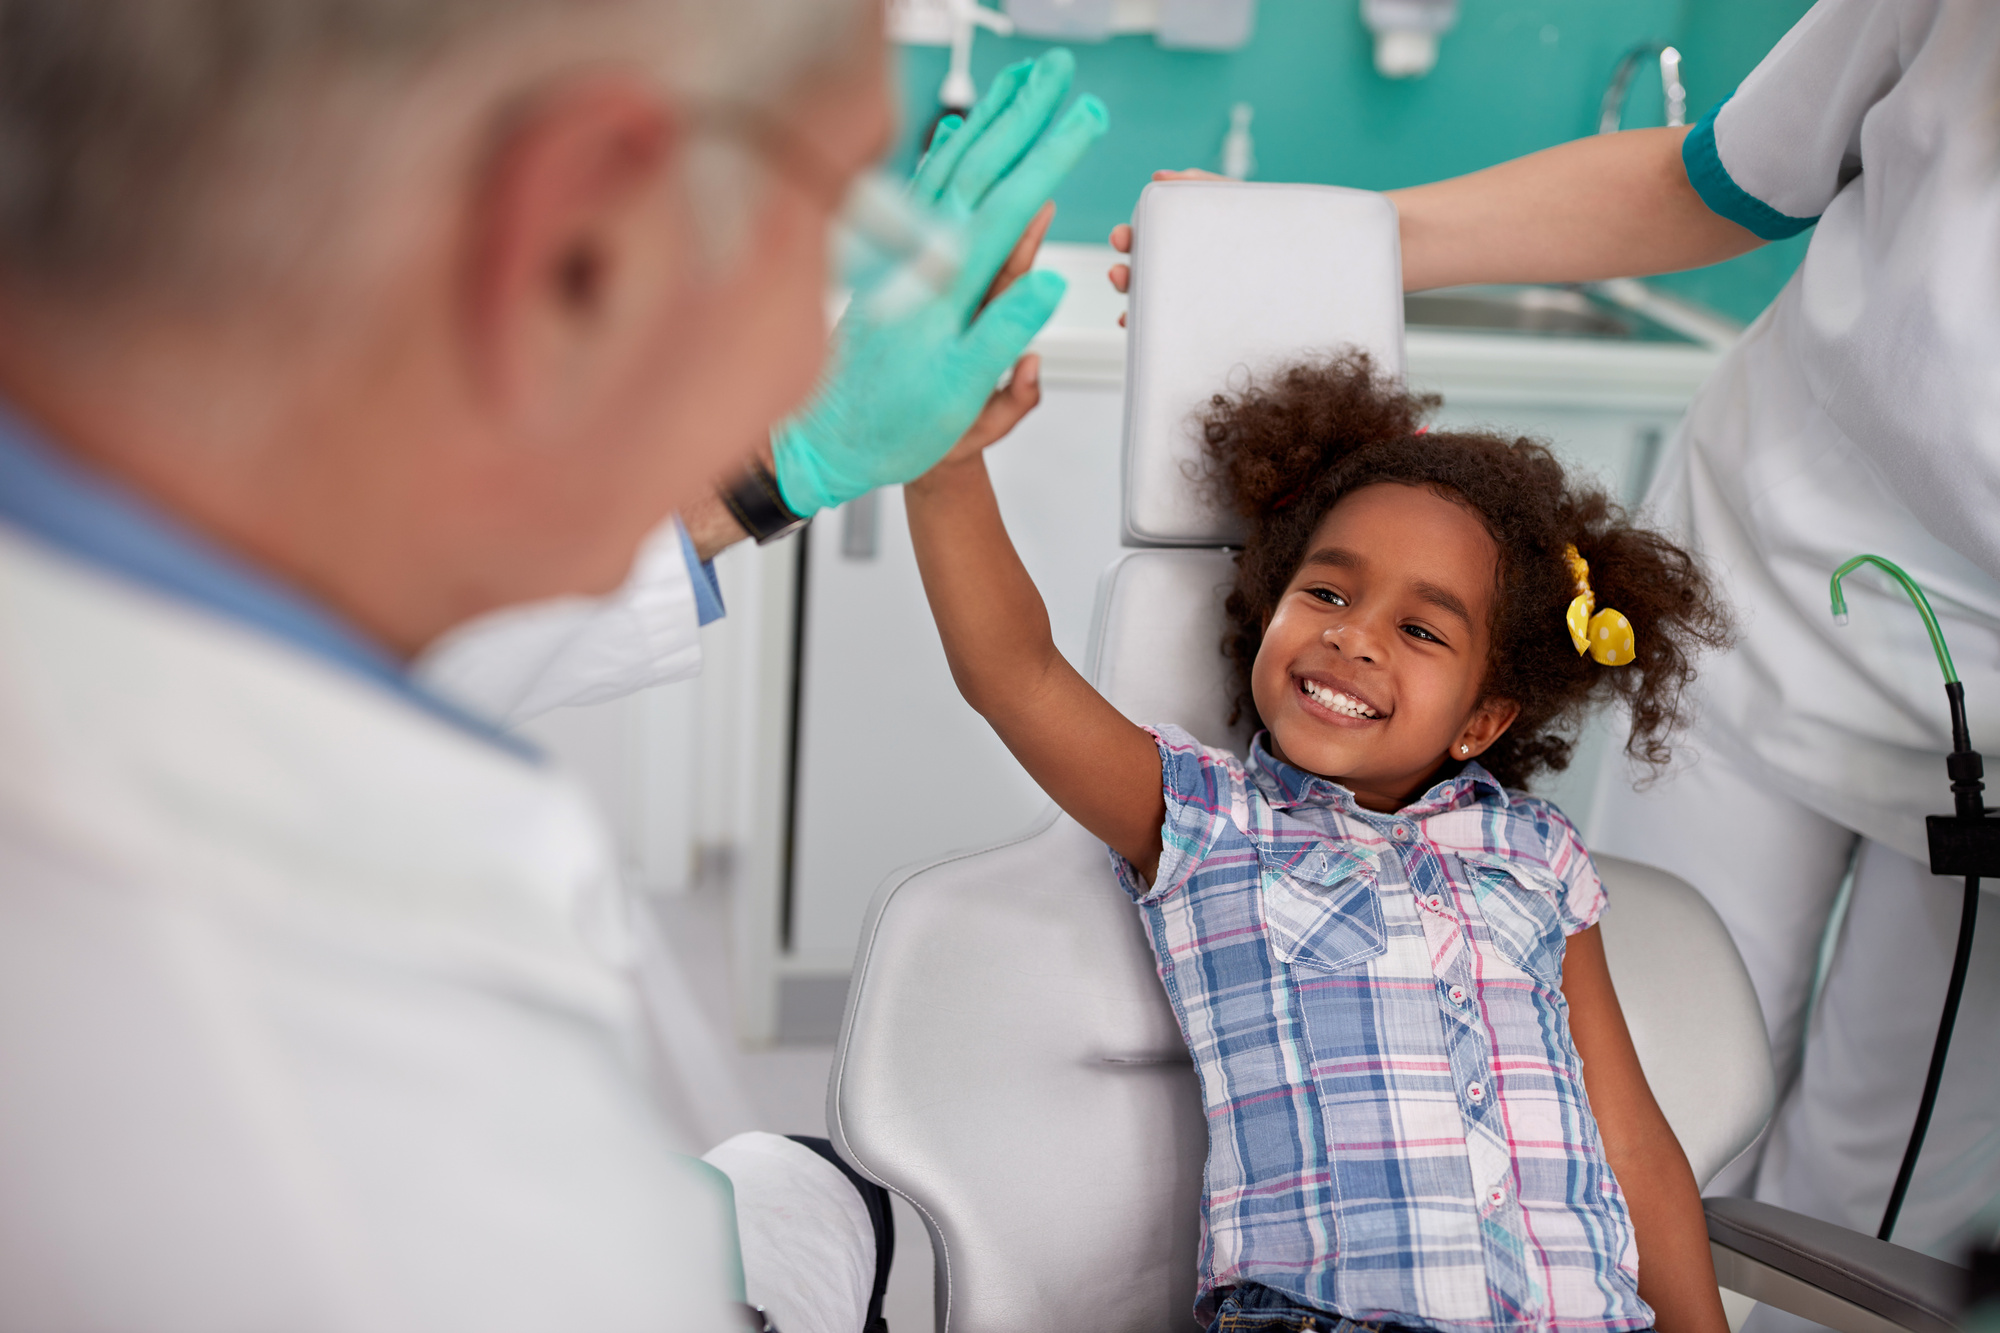 Do you want to know the must-have qualities of a family dentist? Read this to discover the must-have qualities of a family dentist!